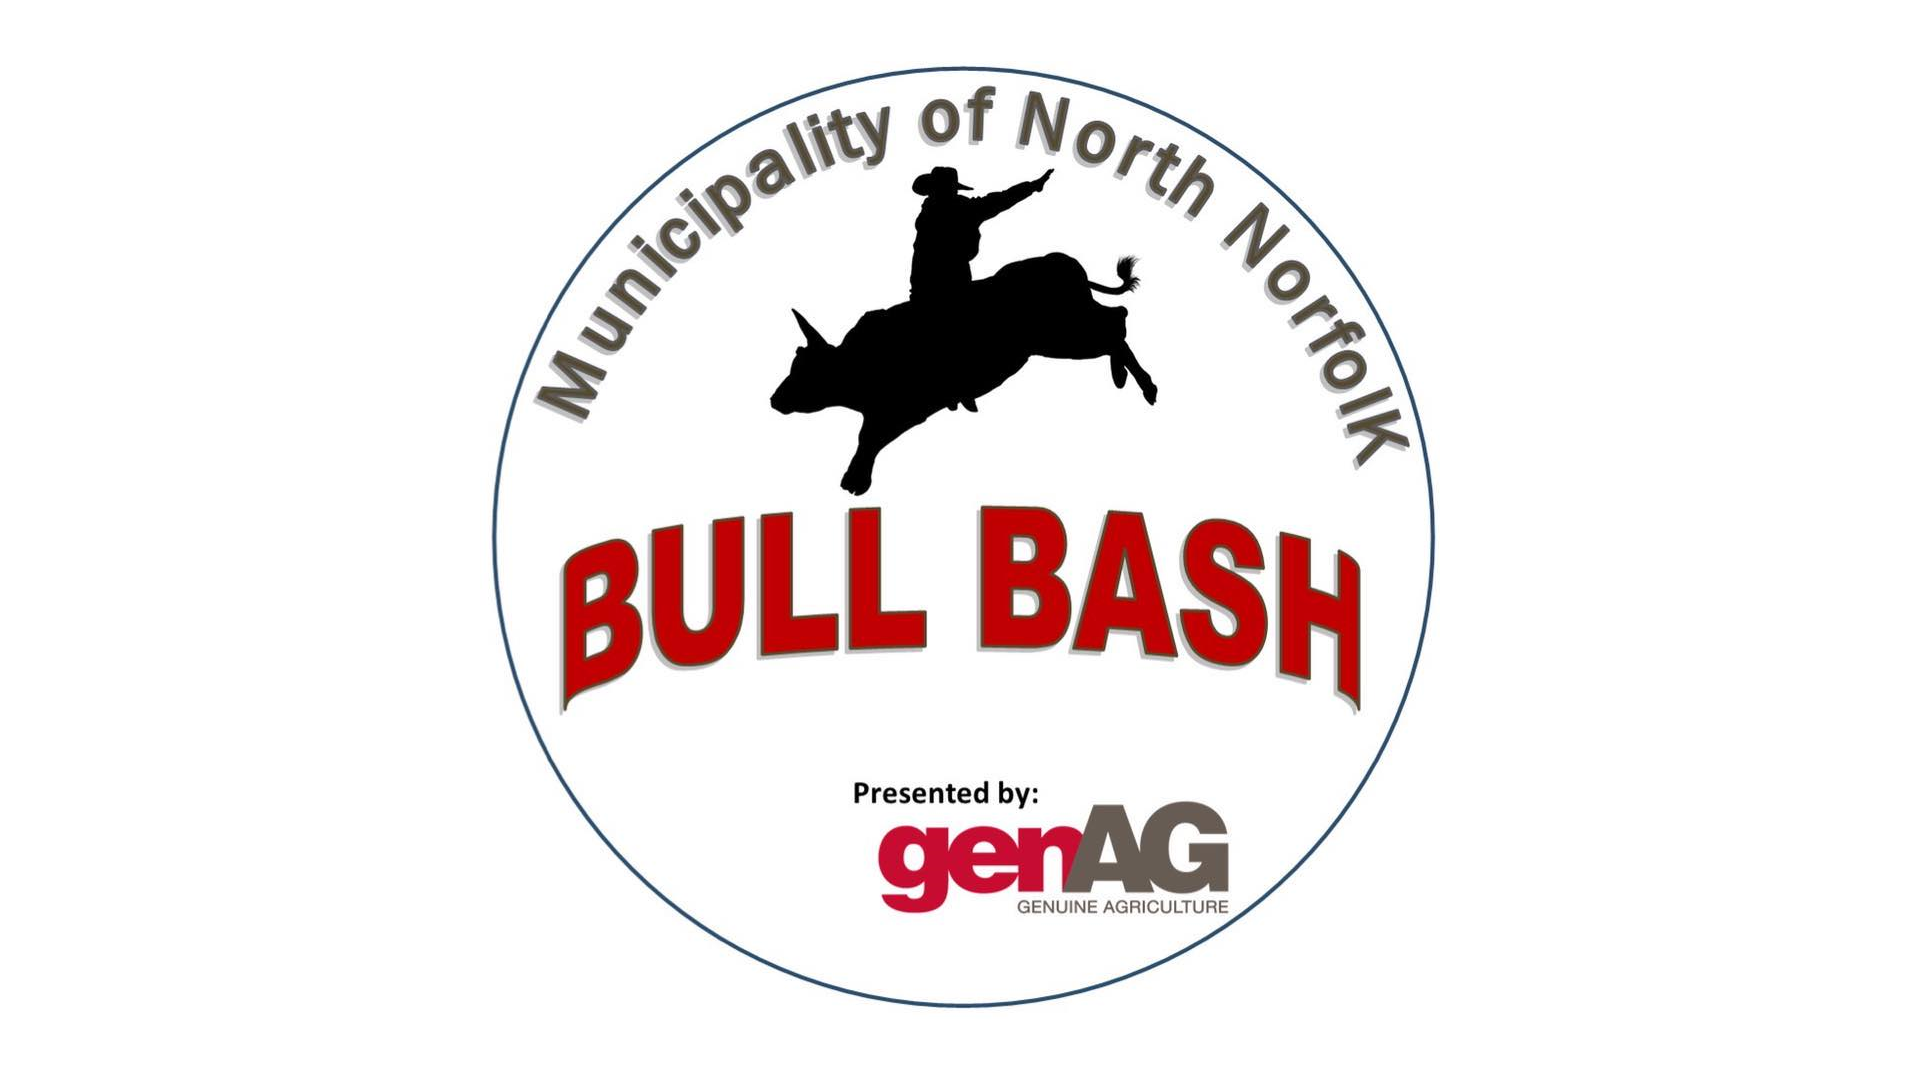 Photo for Municipality of North Norfolk Bull Bash presented by GenAg on ViewStub